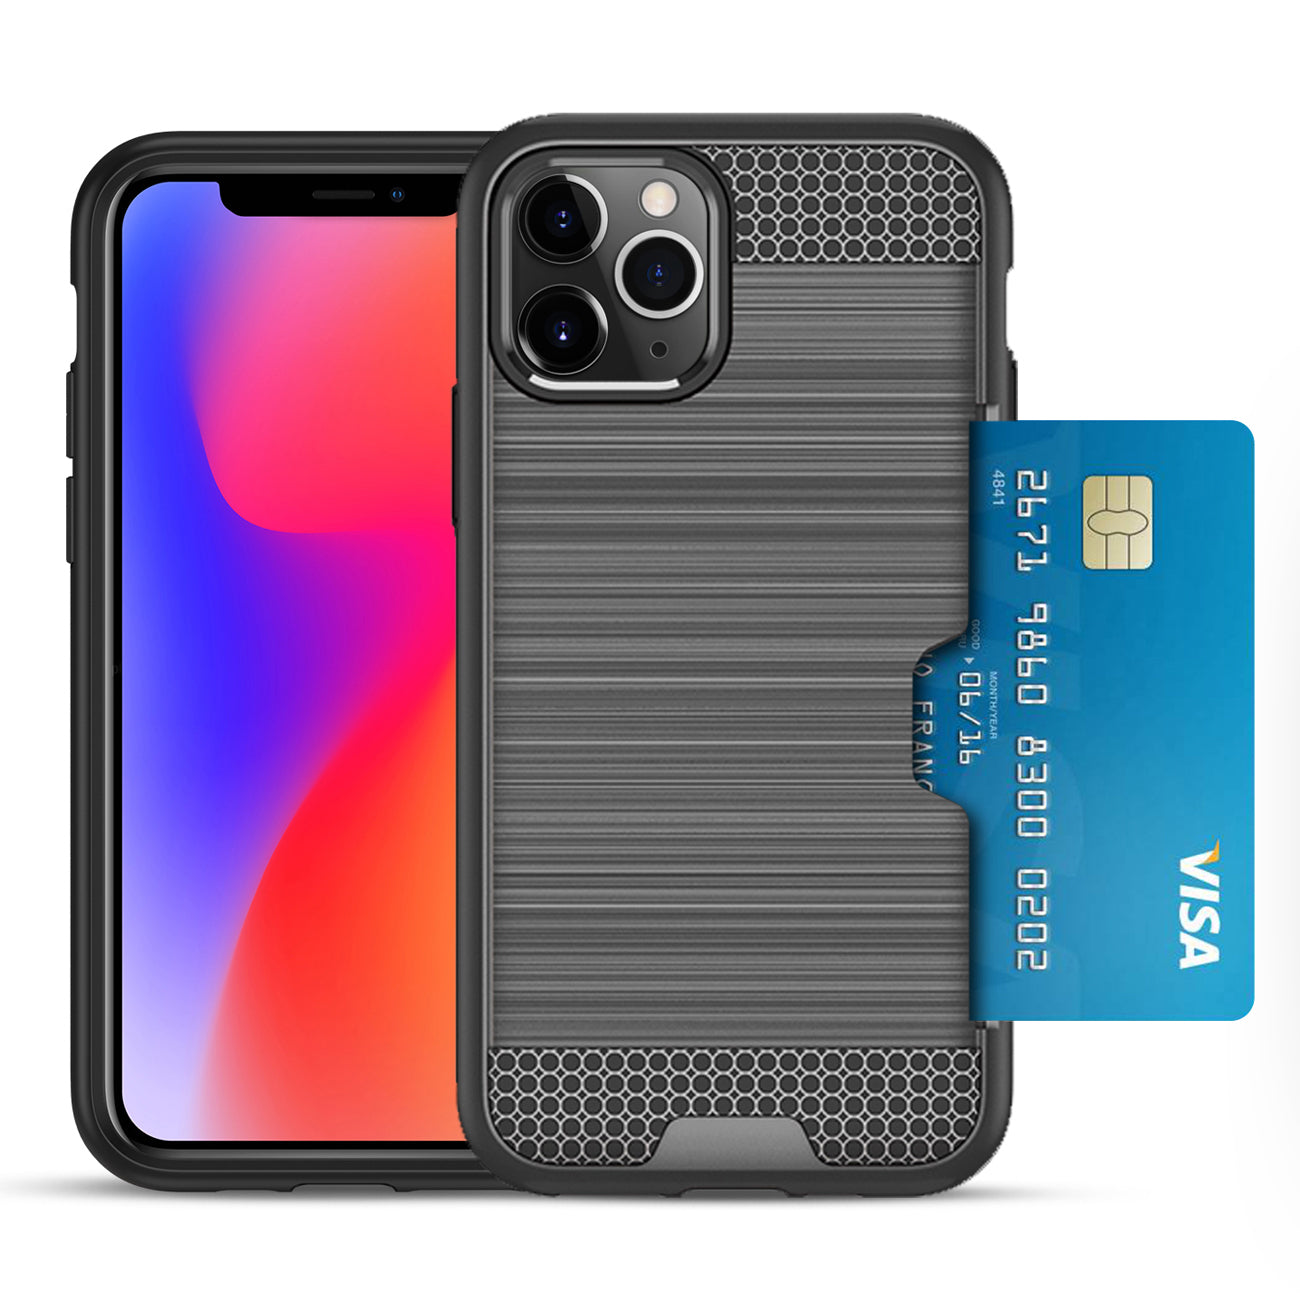 REIKO iPhone 11 PRO SLIM ARMOR HYBRID CASE WITH CARD HOLDER IN GRAY